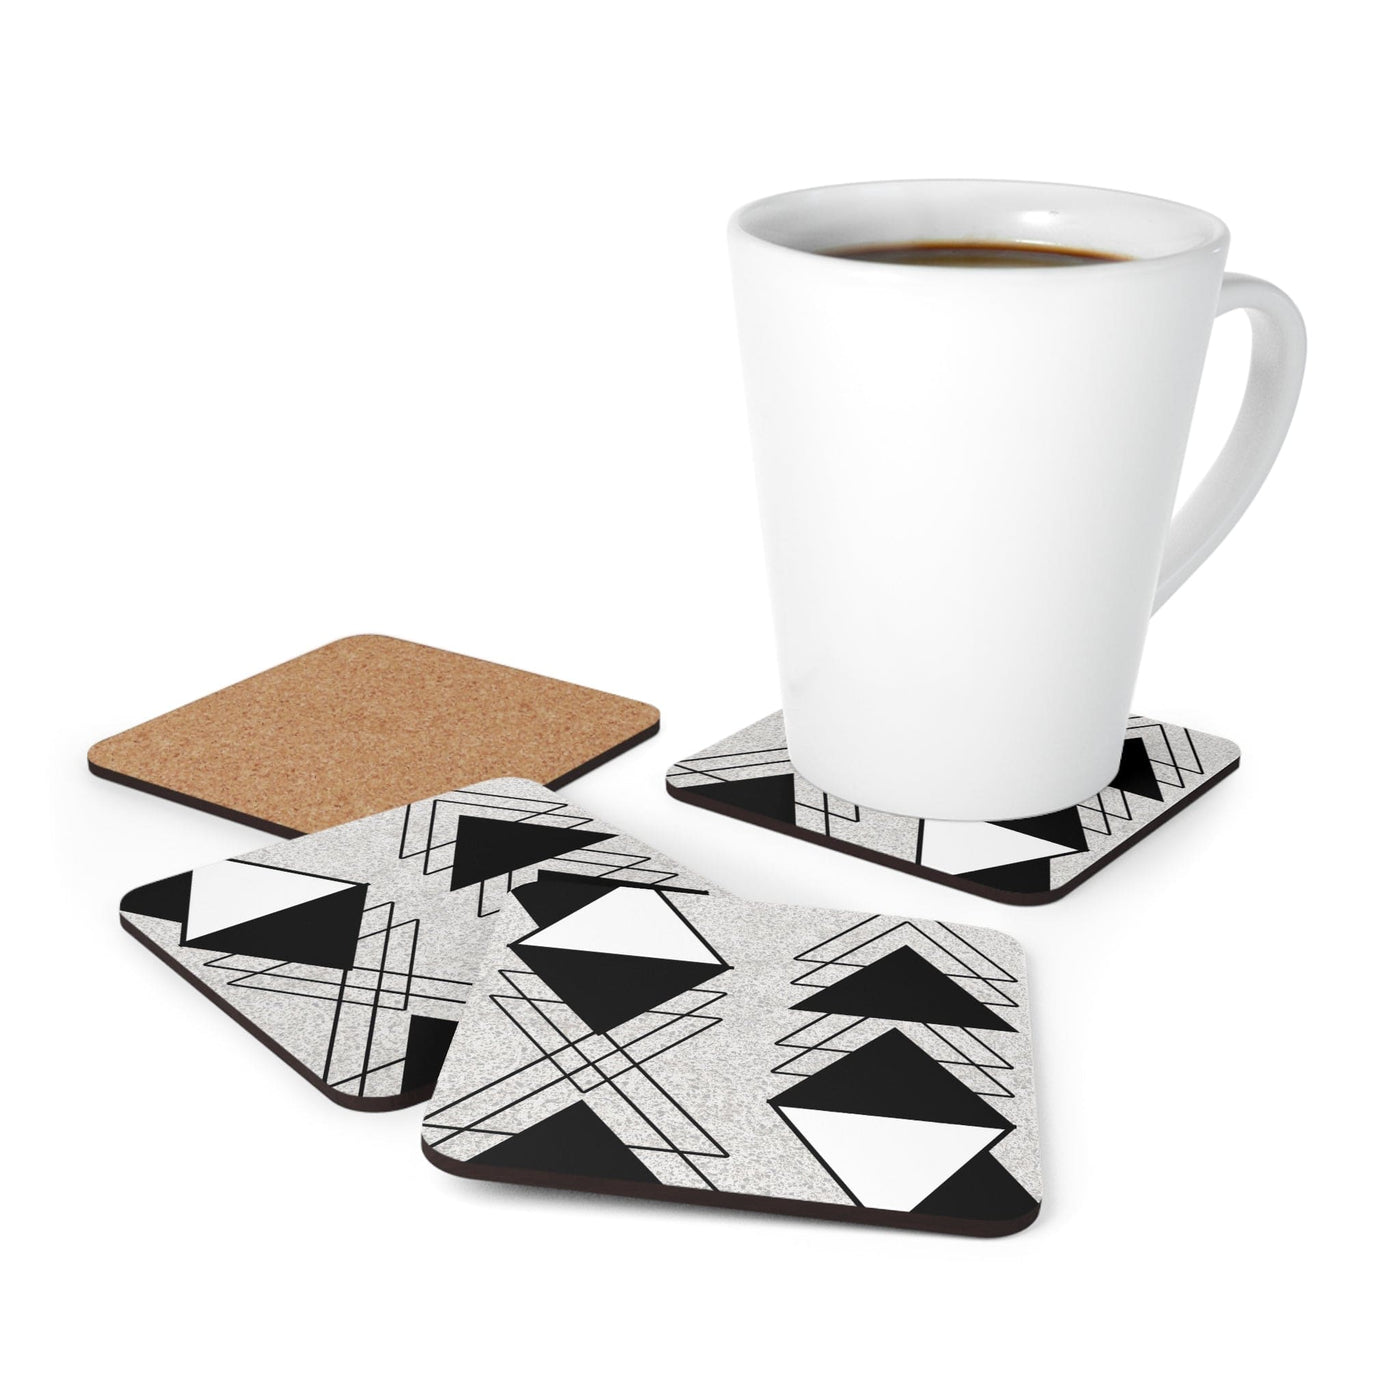 Coaster Set Of 4 For Drinks Black And White Ash Grey Triangular Colorblock